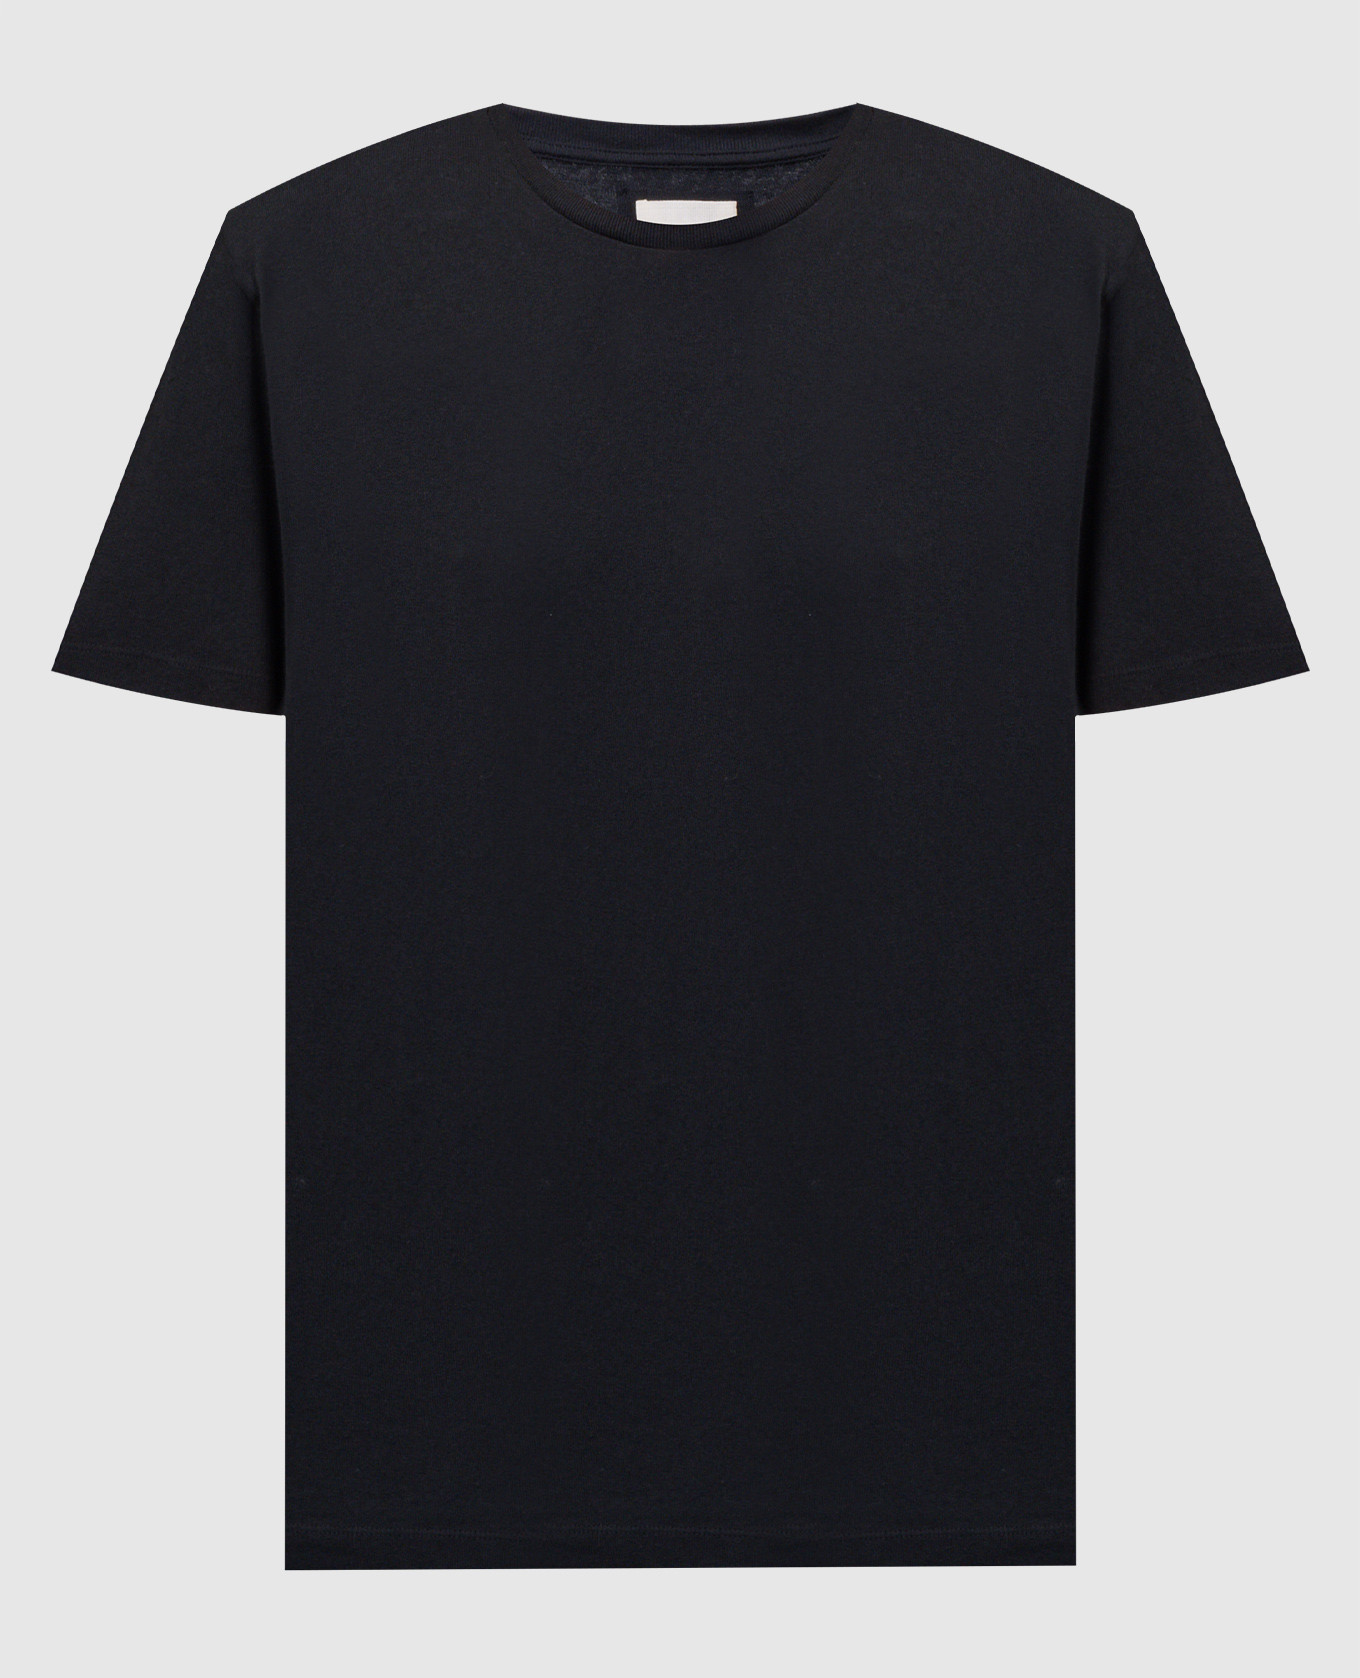 Mae T-shirt in black with logo patch